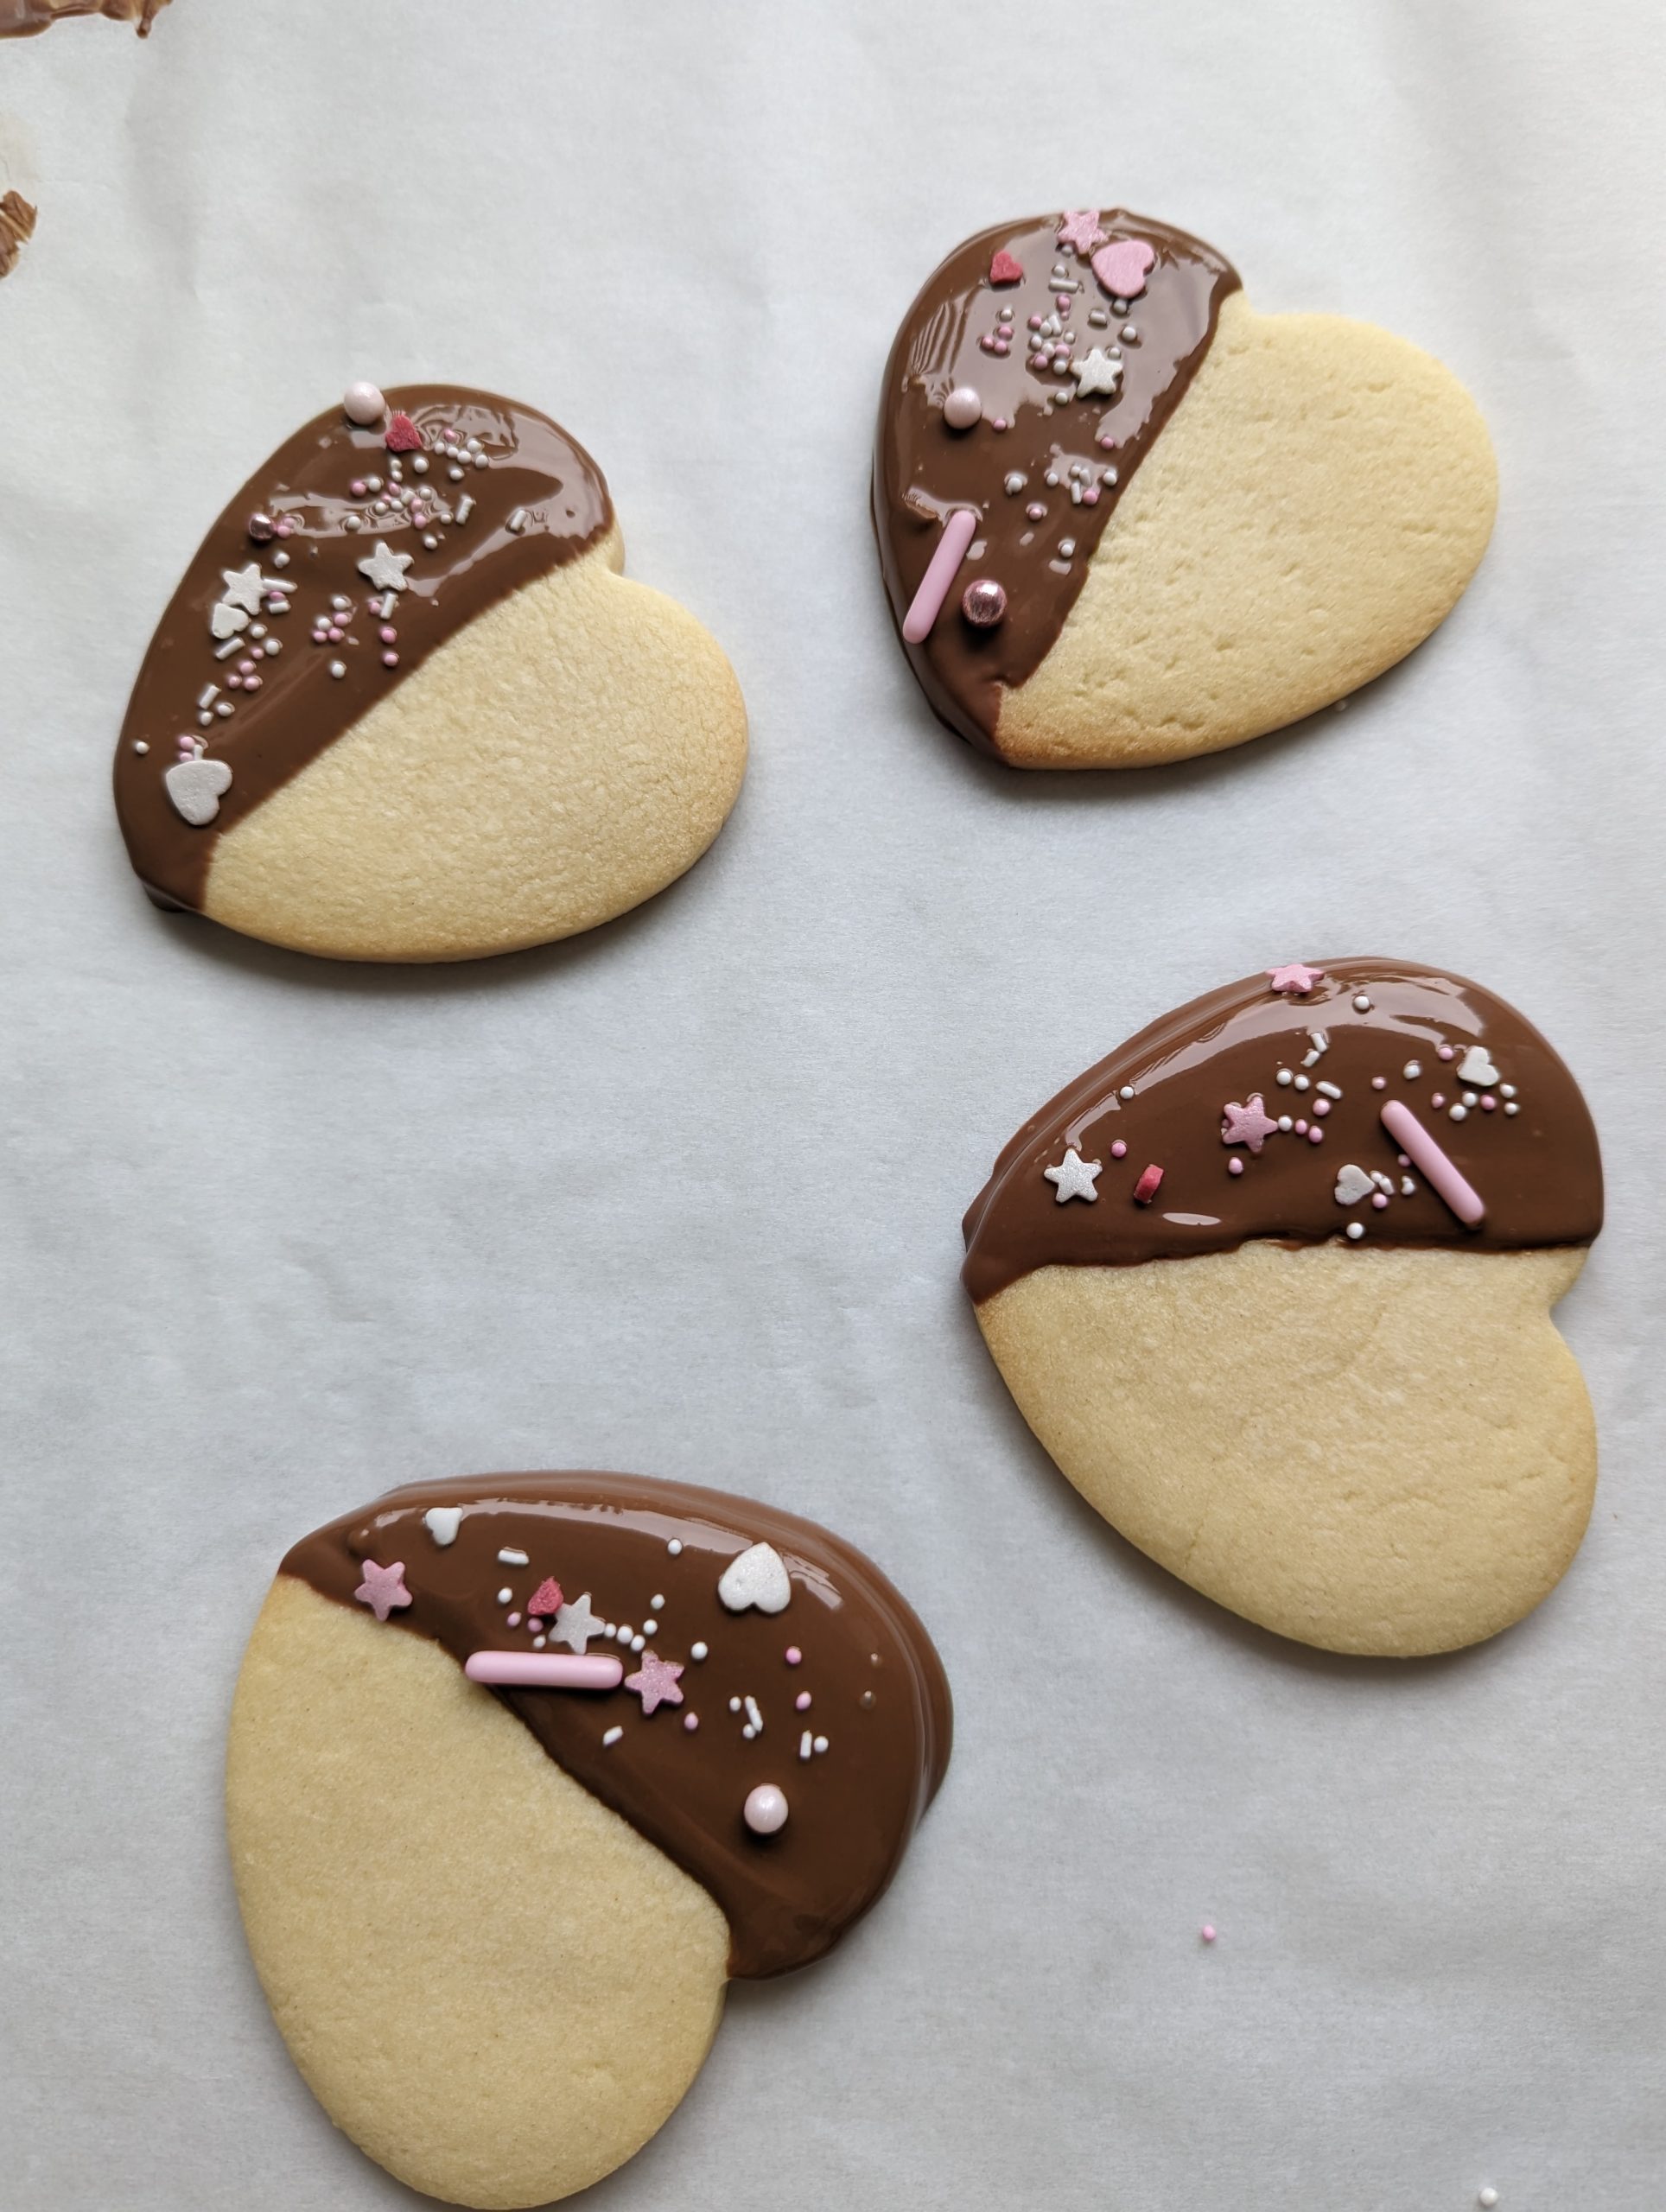 Chocolate-dipped heart sugar cookies topped with sprinkles